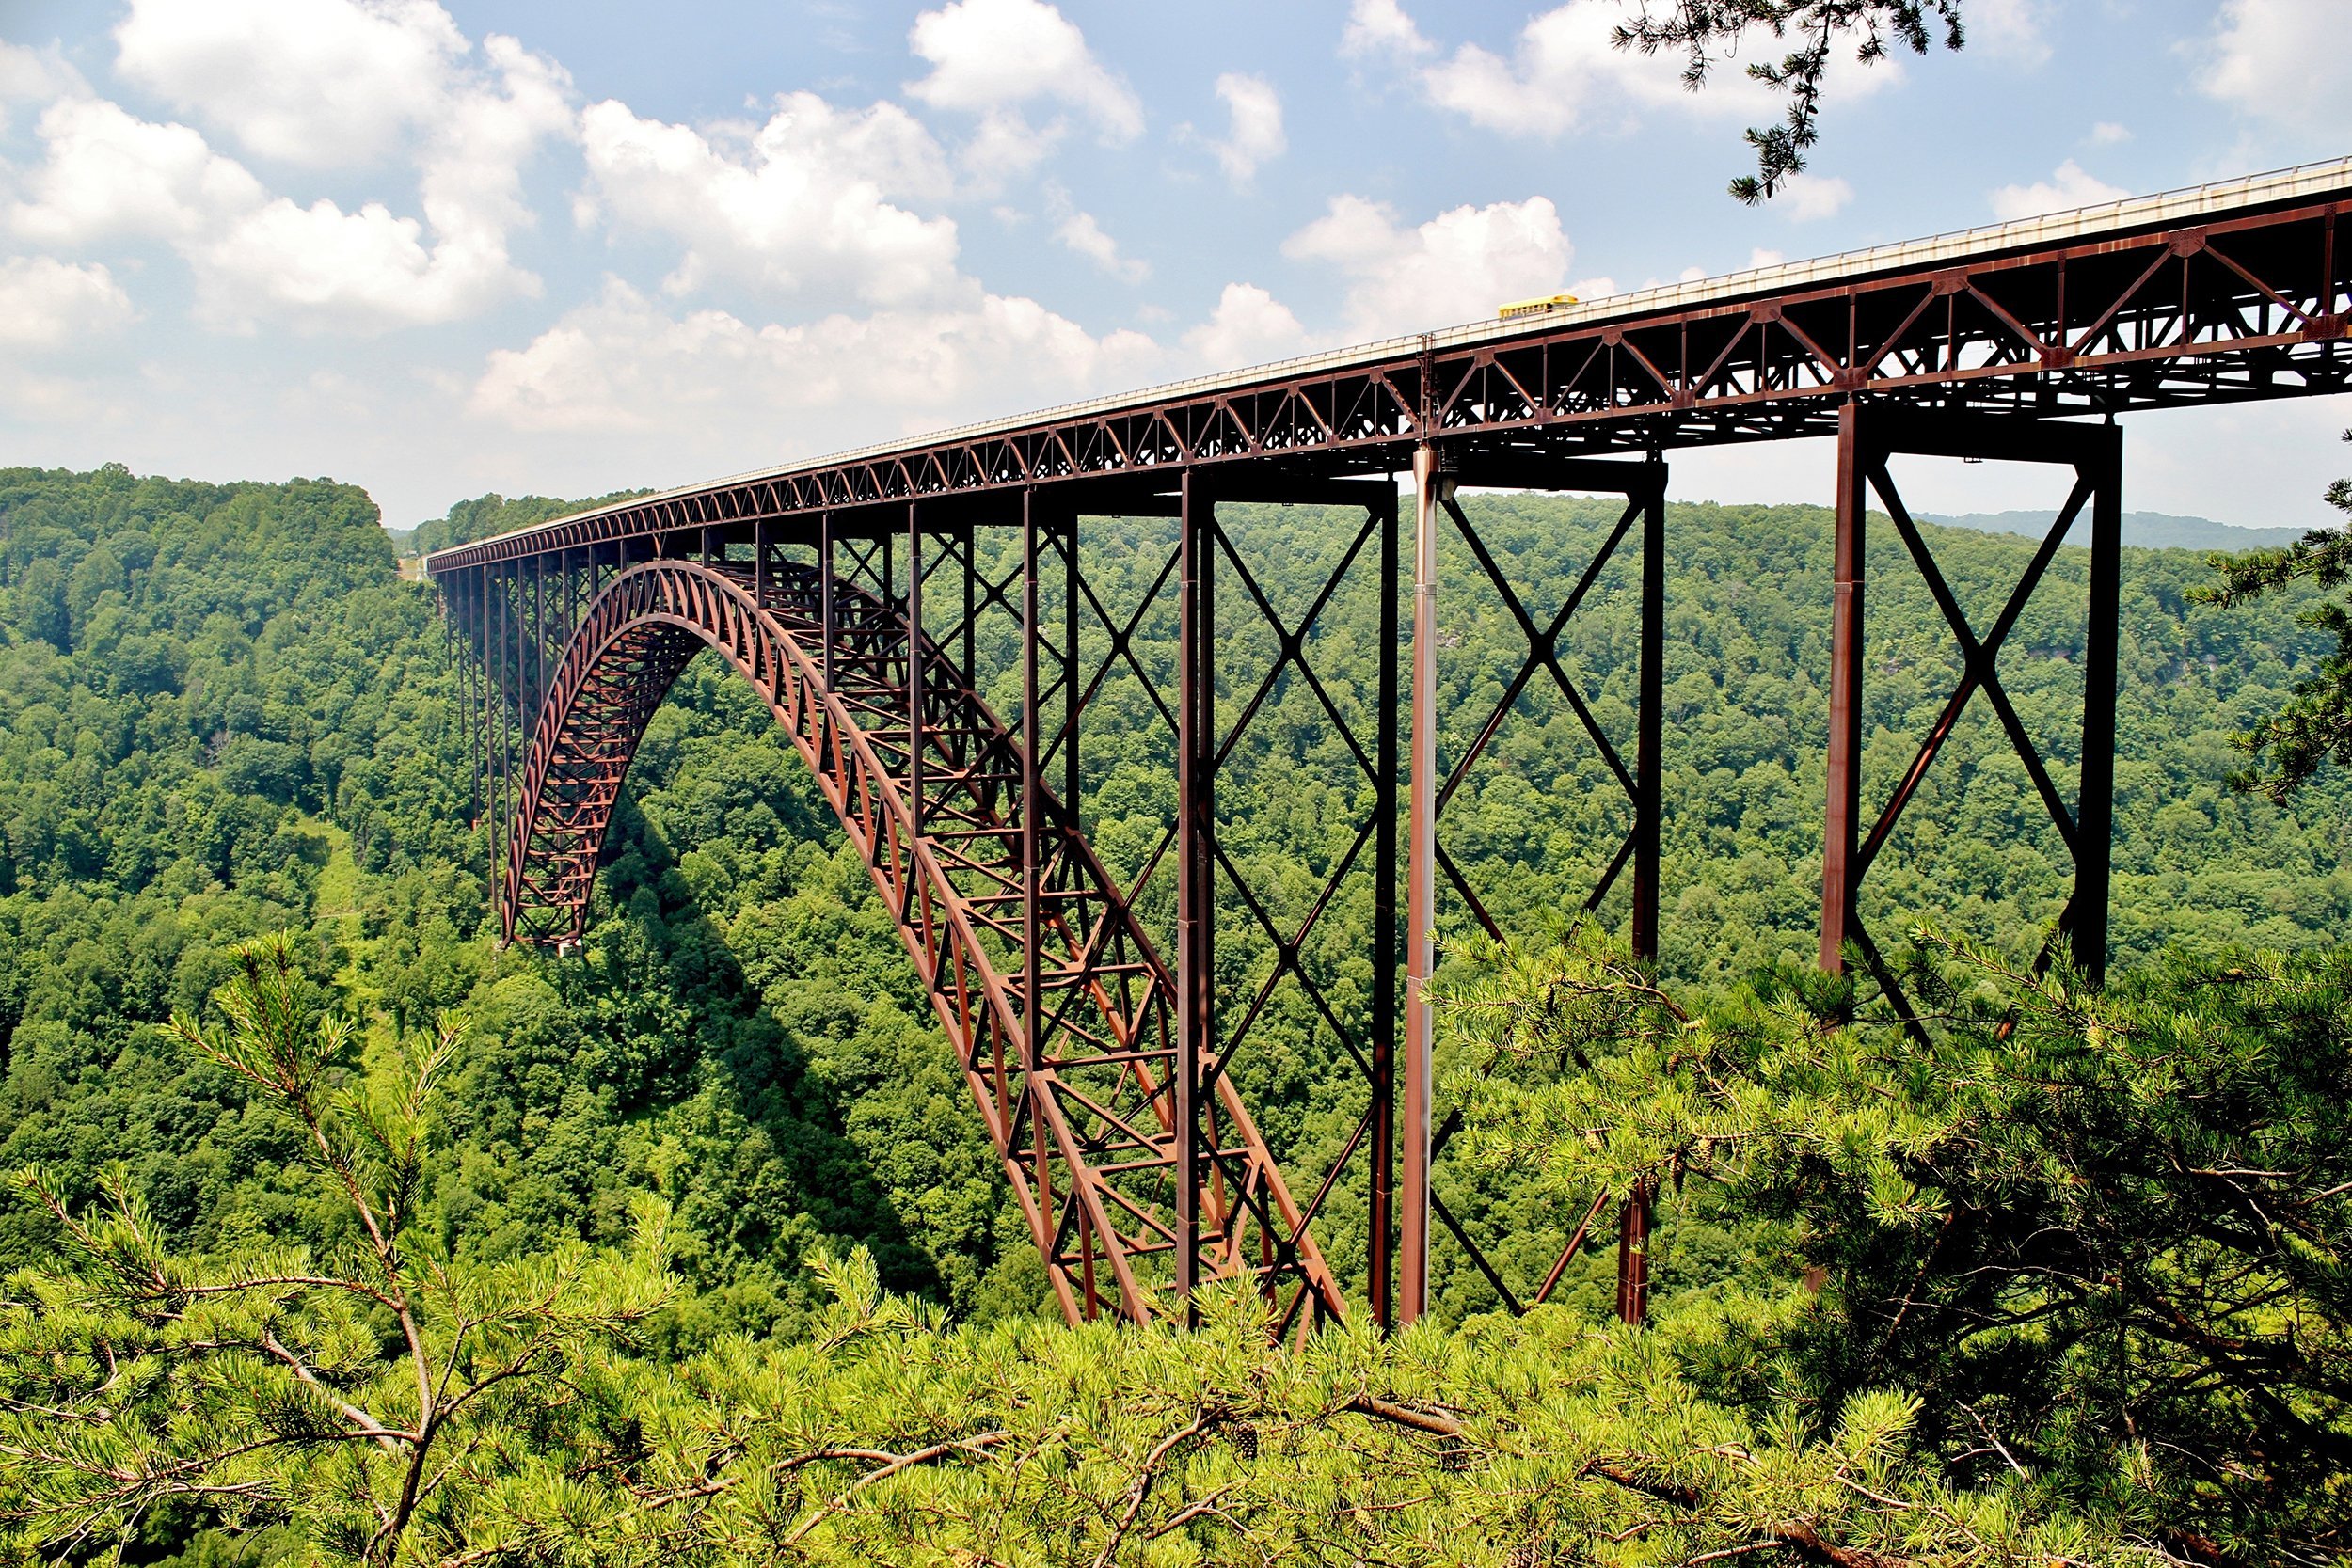 <p><a href="https://www.nps.gov/neri/index.htm">New River Gorge</a> was upgraded to national park status in December 2020, making it the system’s most recent addition, and includes some 70,000 acres in south central West Virginia where biking, hiking, and white-water rafting are just some of the activities. Visitors can marvel at the New River Gorge Bridge, the longest arch bridge in the Western Hemisphere, and the park has developed a self-guided African American Heritage Auto Tour examining black history in the New River Gorge area. </p>